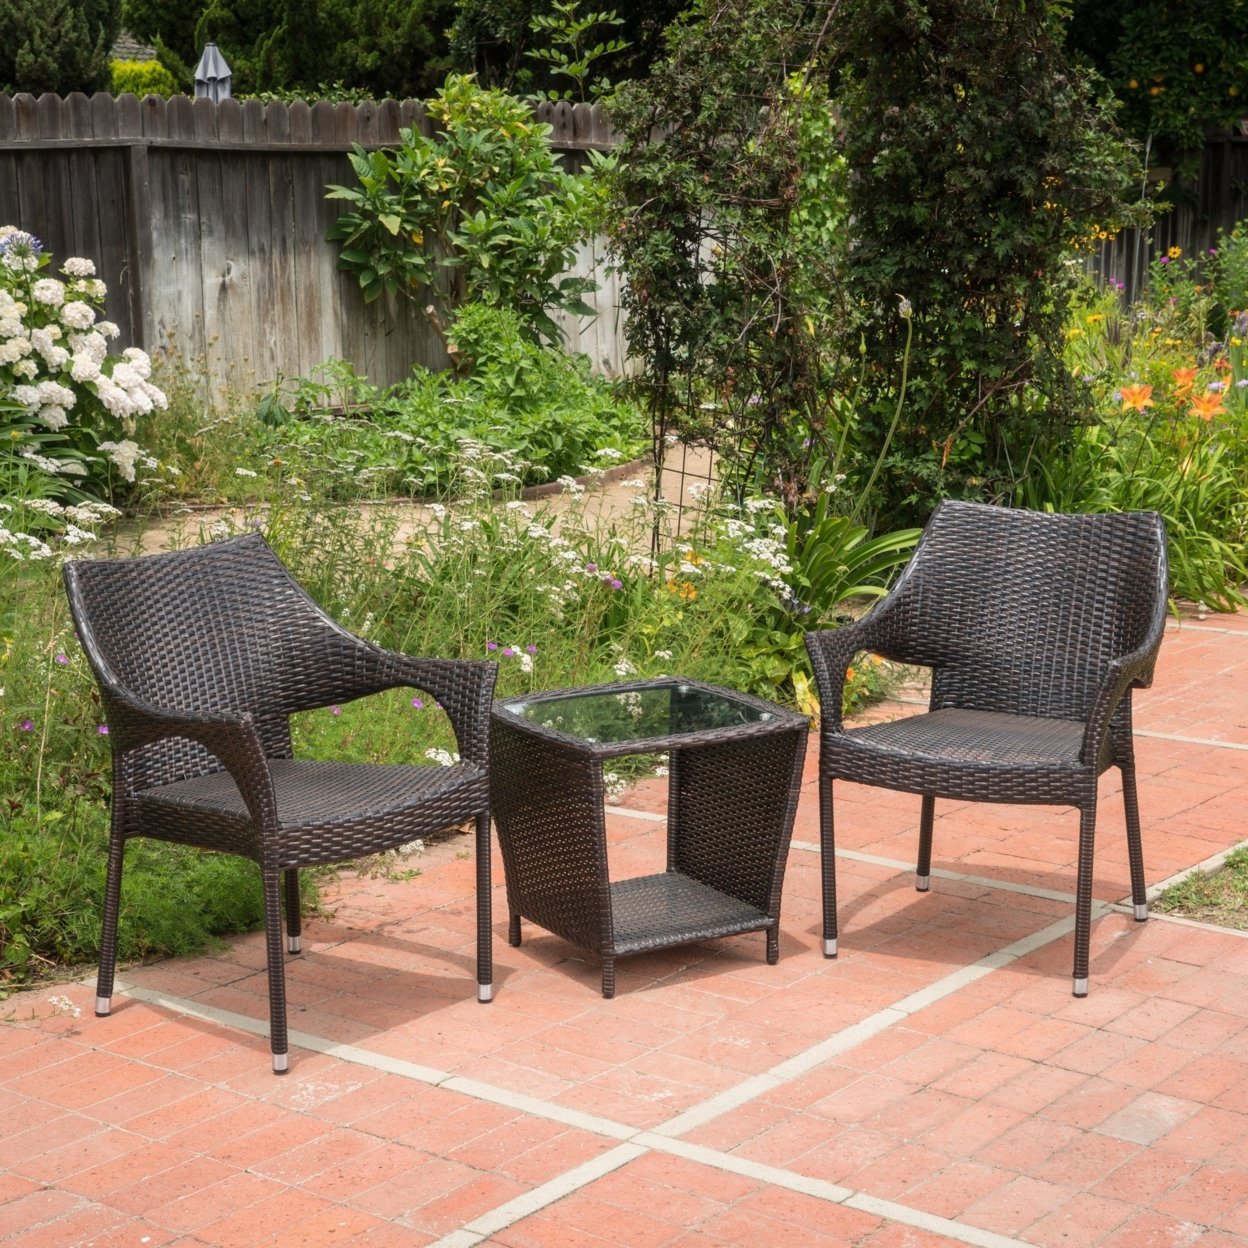 Alfheimr Outdoor 3 Piece Multi-brown Wicker Stacking Chair Chat Set - Framed Hour Glass Table